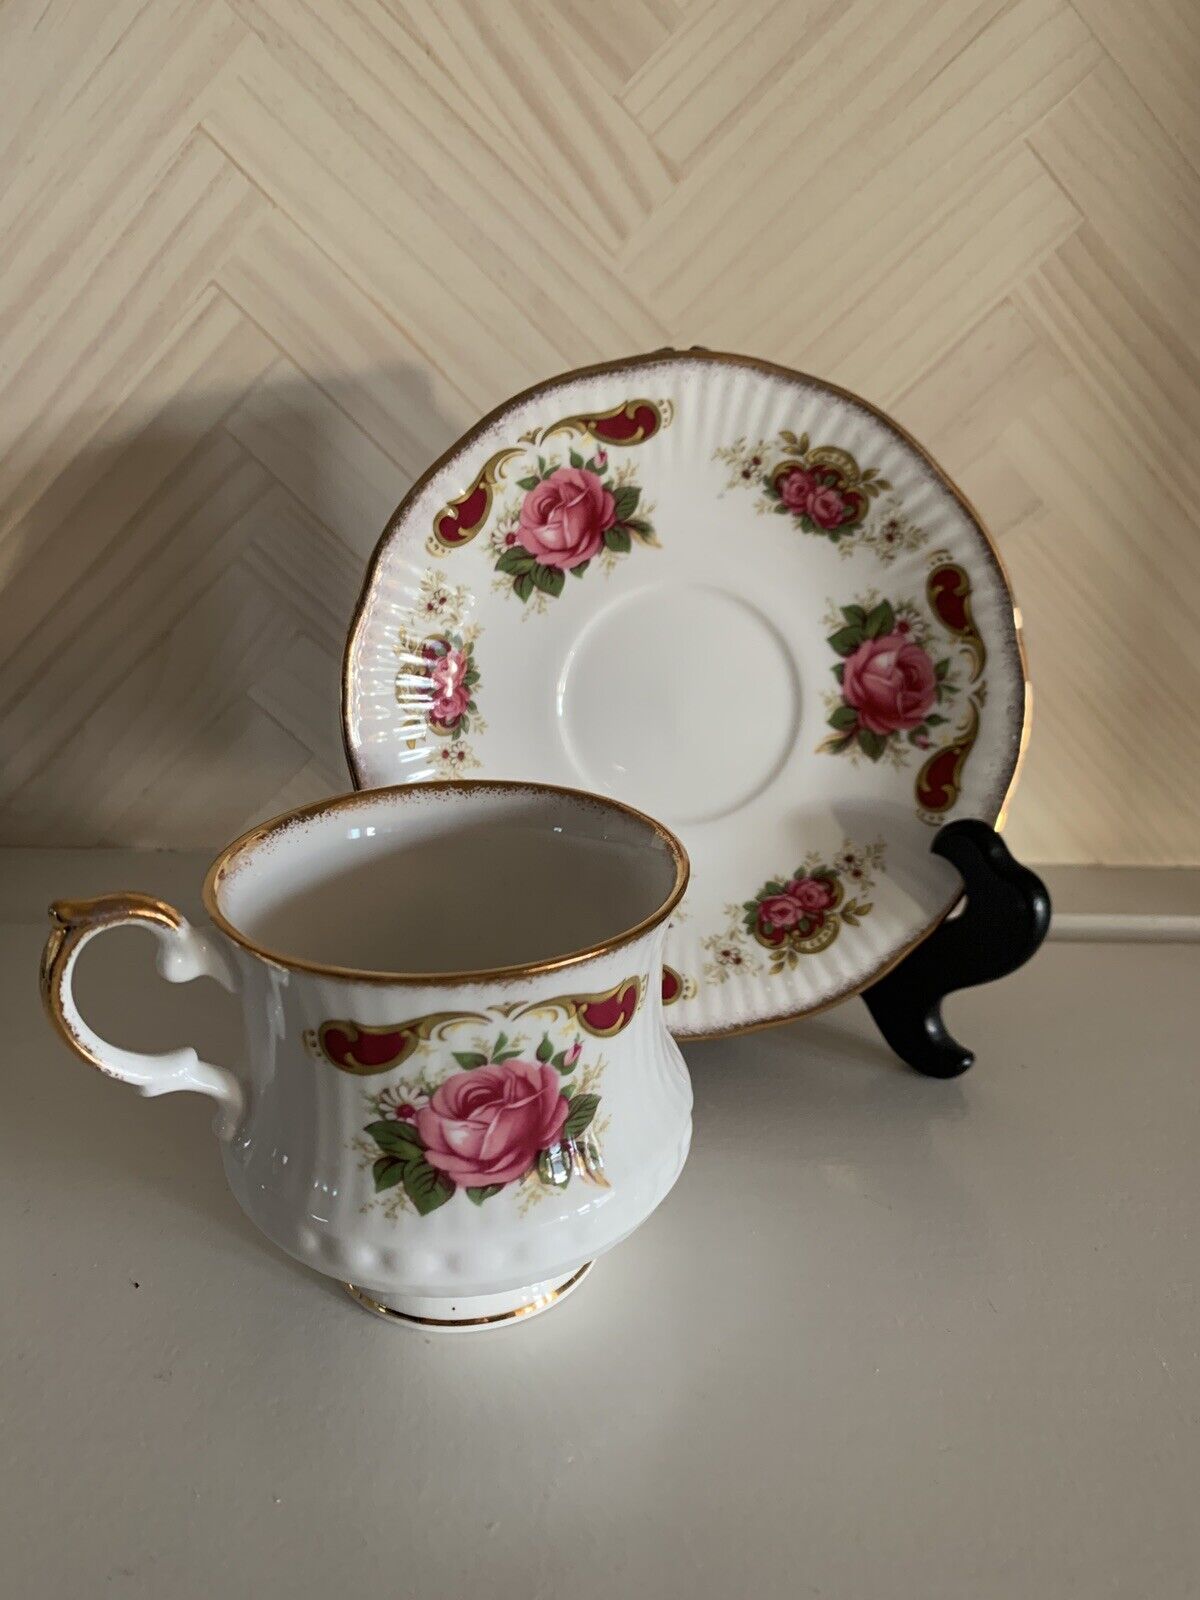 Vintage Fine Bone Teacup & Saucer by Royal Dover China Made in England